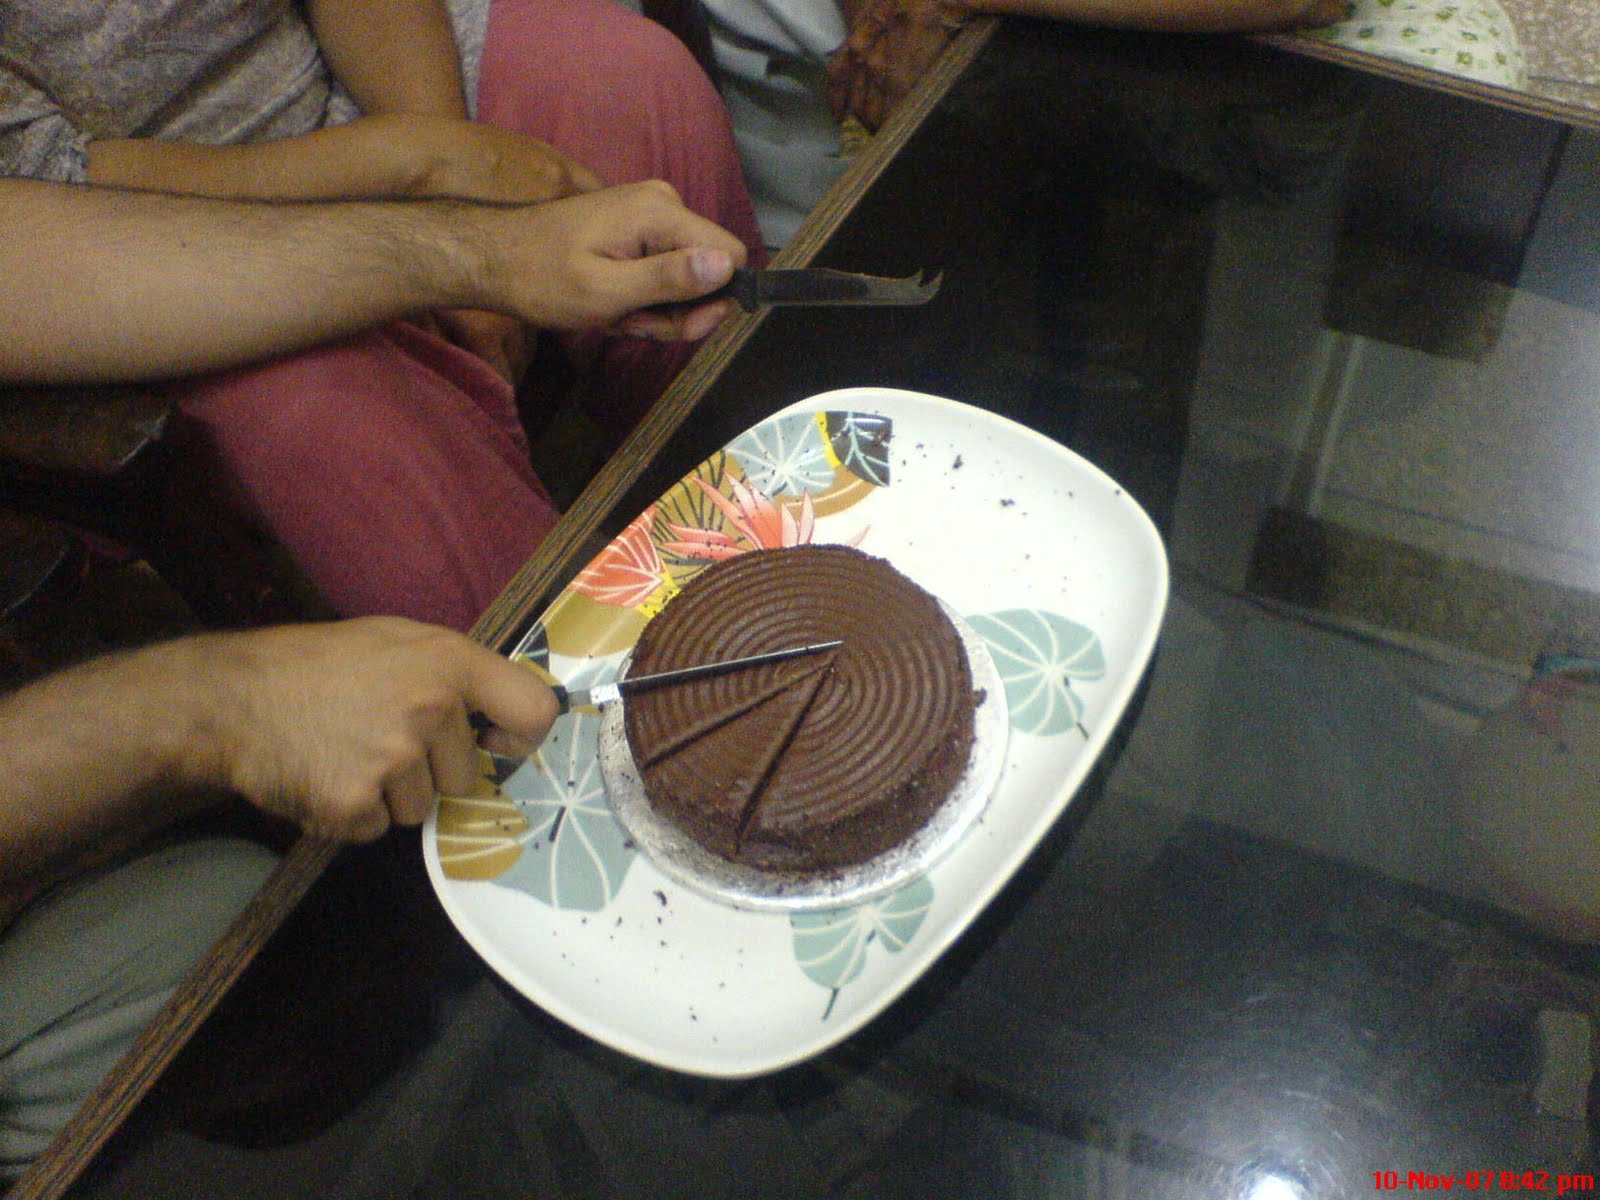 cool cake designs Simple chocolate cake with rounded design being cut by birthday boy.